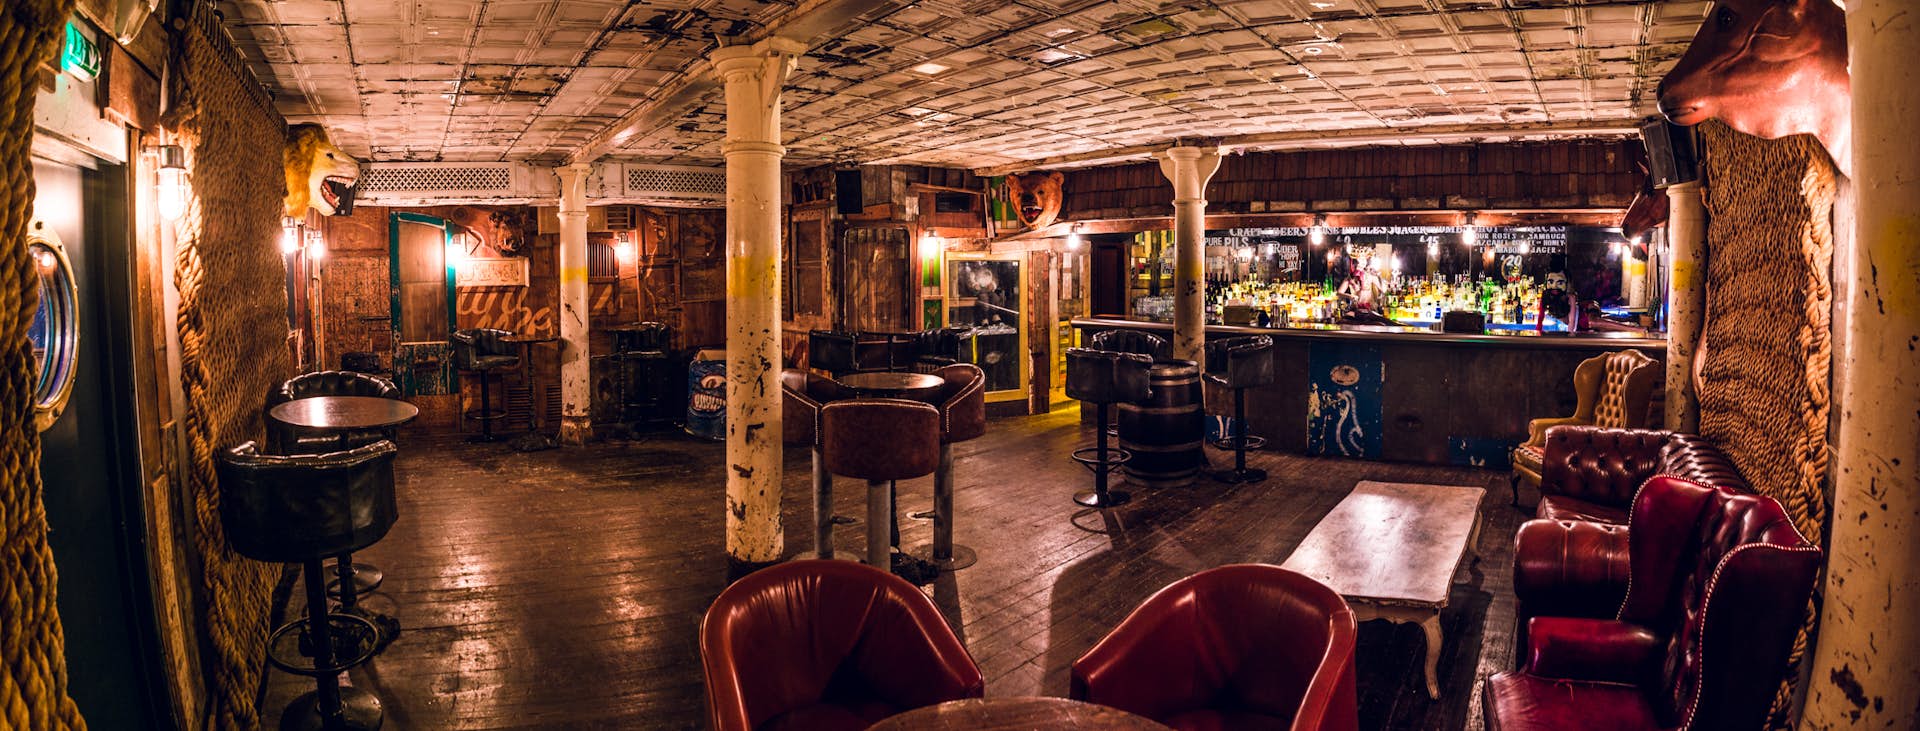 Private Room | Events | The Blues Kitchen Shoreditch